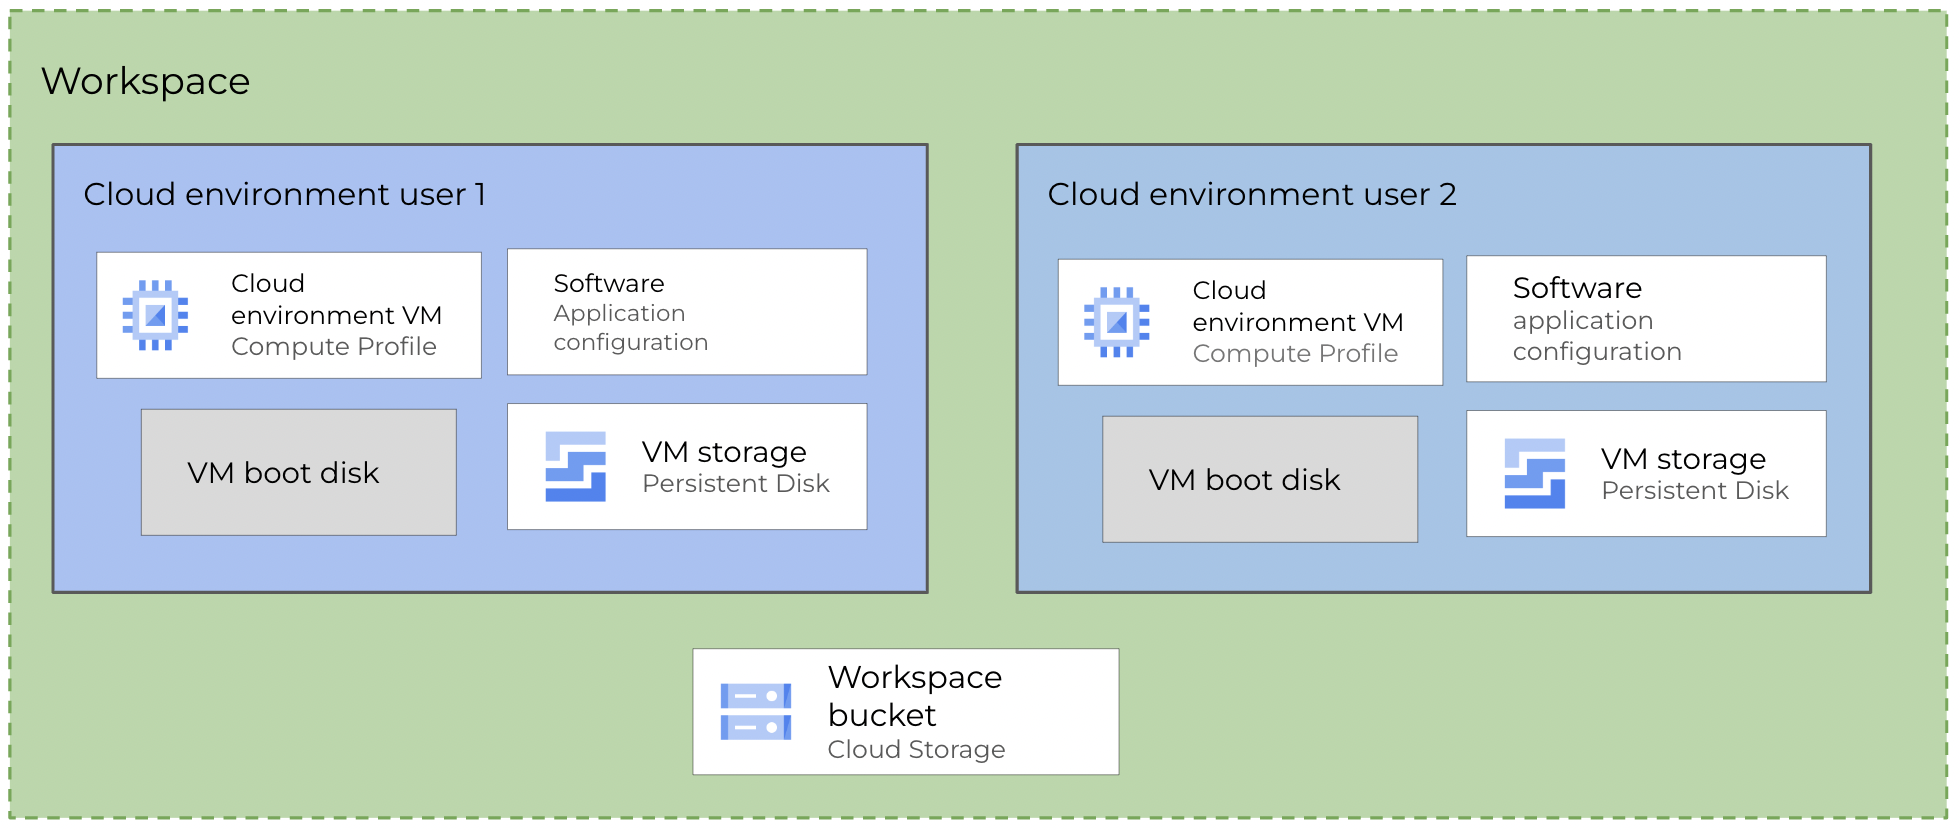 Terra-architecture_Workspace-plus-Cloud-environments-for-two-users_Diagram.png